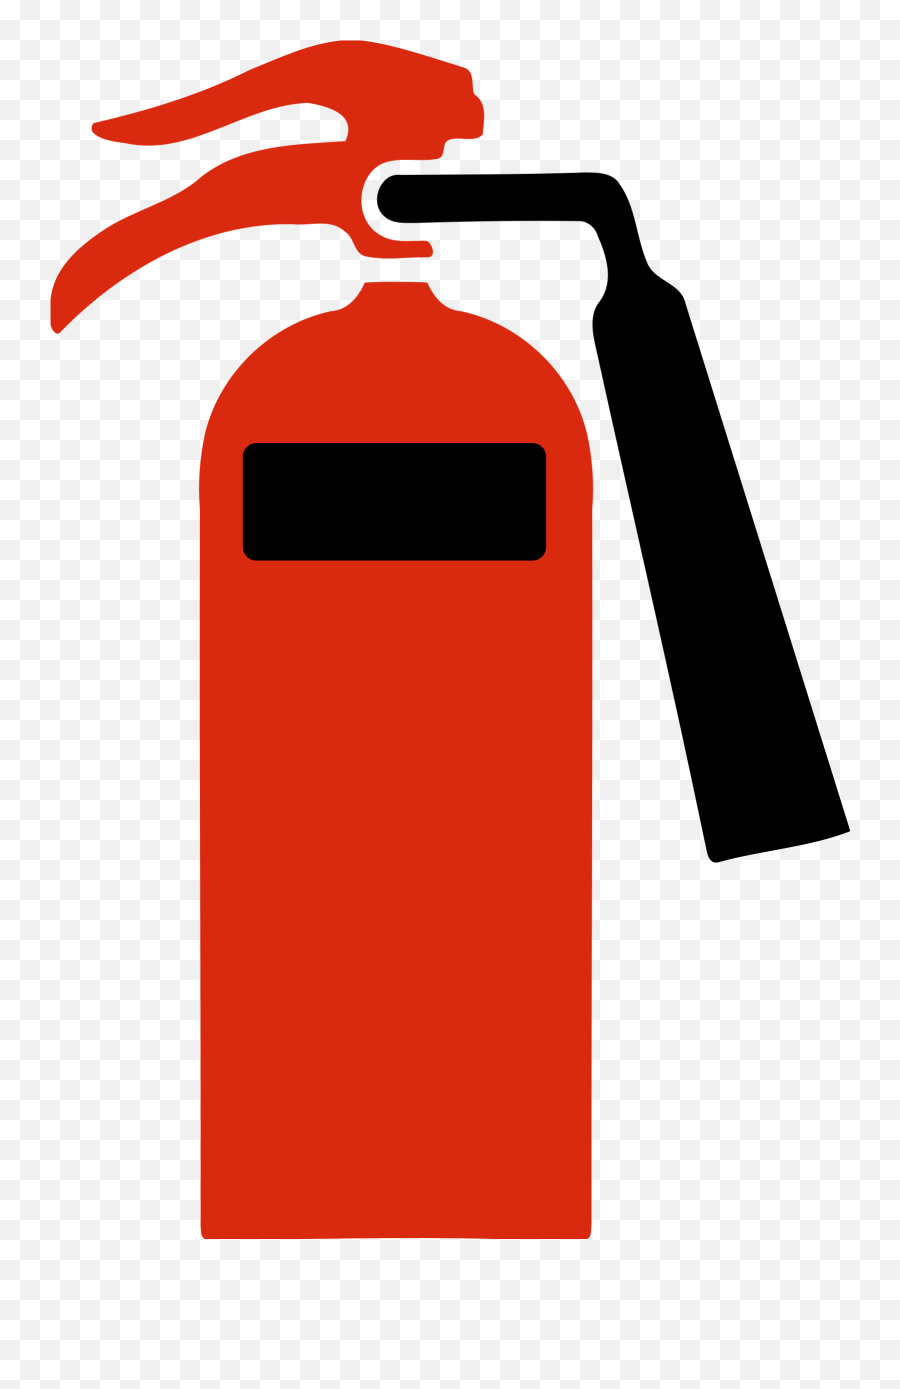 Fire Clipart Bitmap Fire Bitmap Transparent Free For - Mile End Tube Station Emoji,Fire Hydrant Clipart